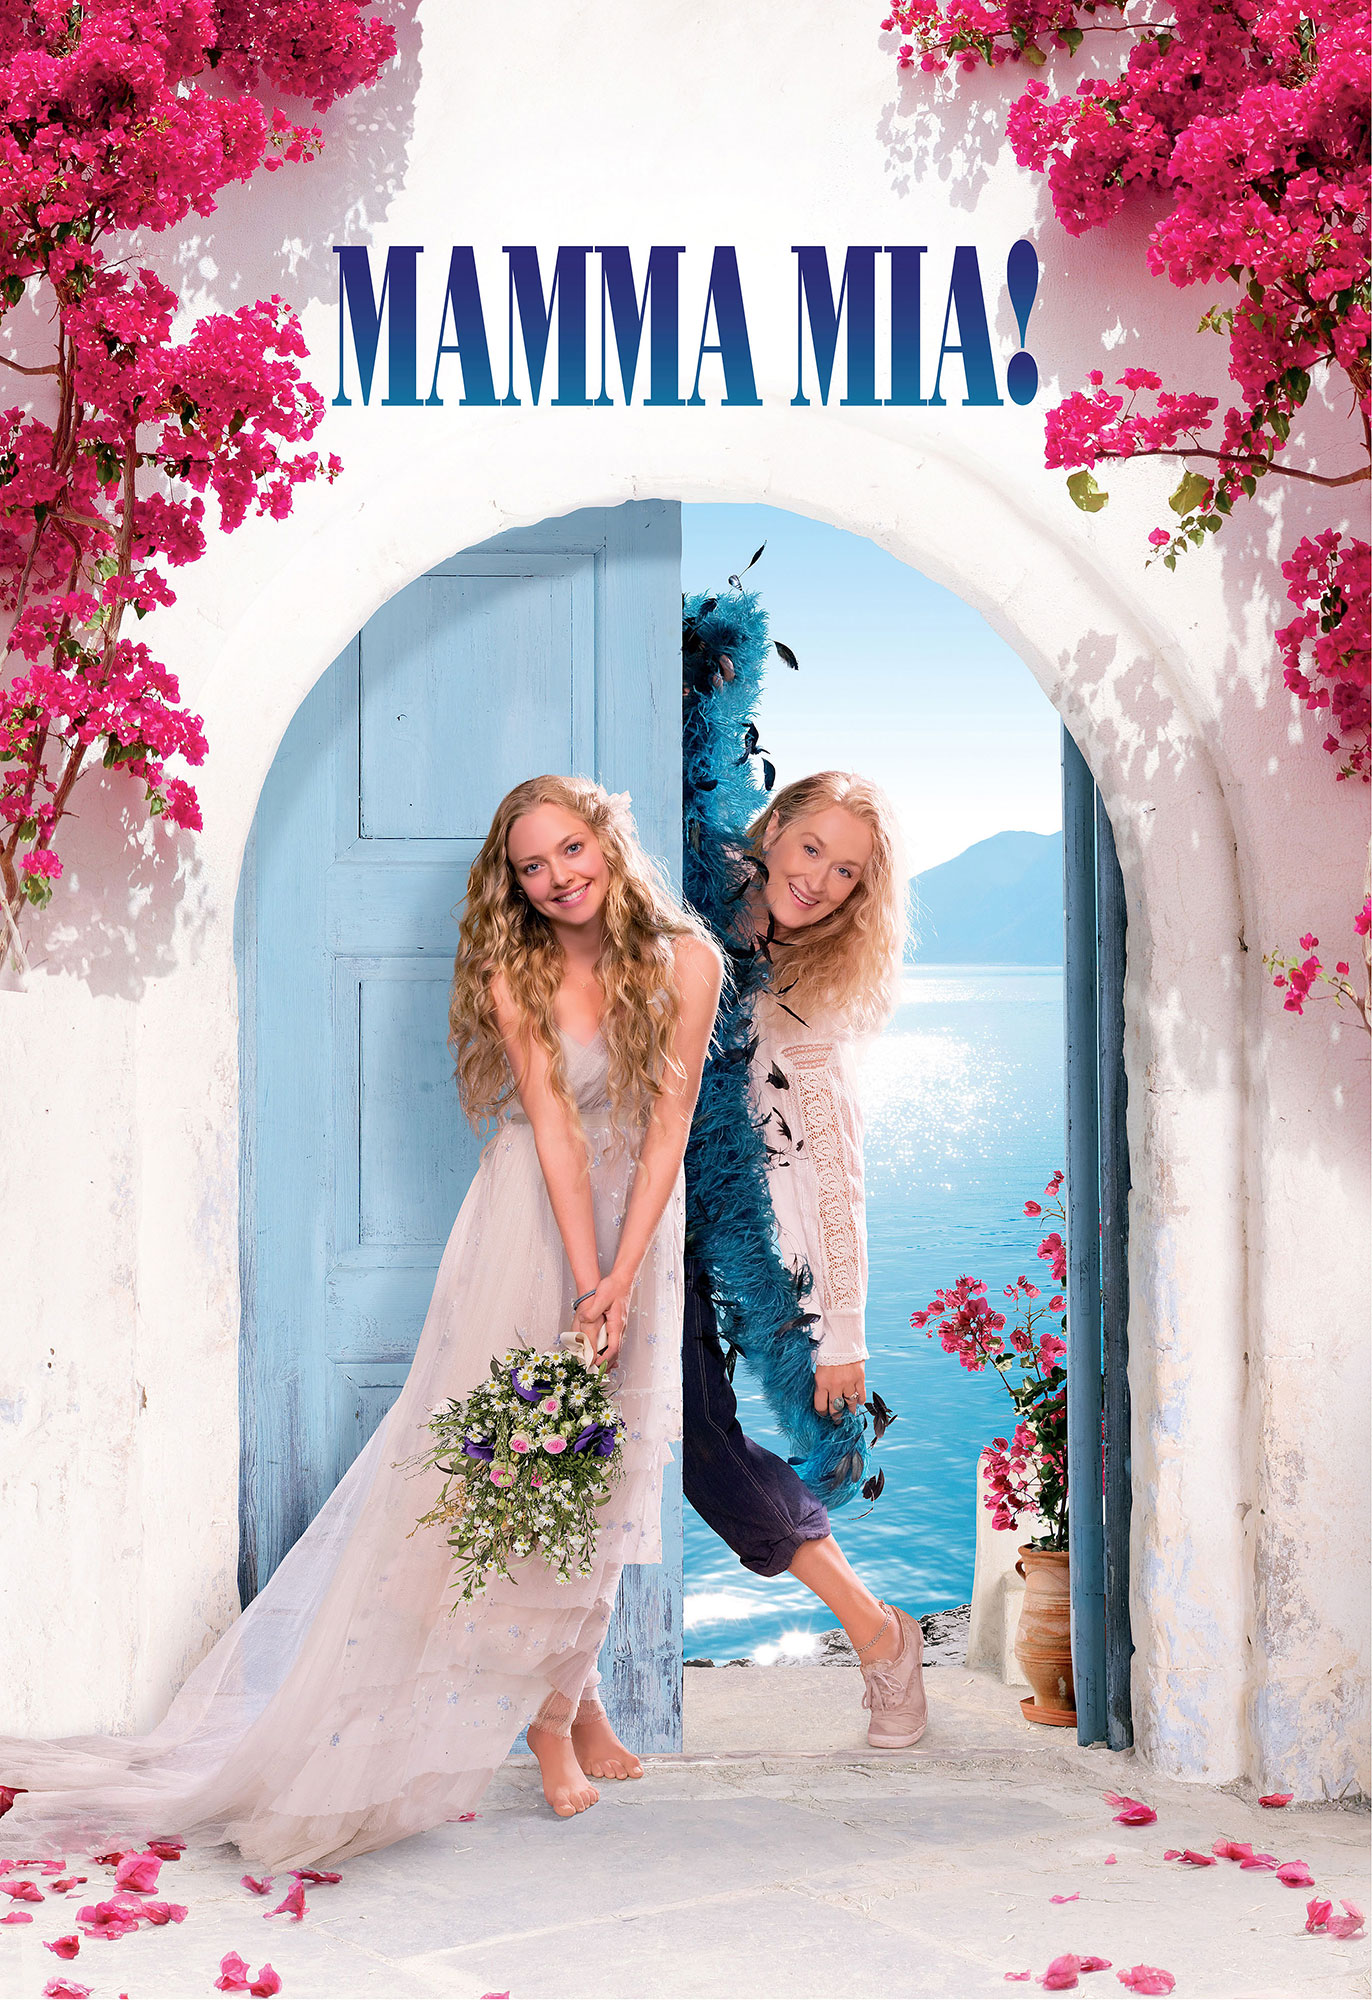 Searching for Sophie: Who Is the Girl in the Mamma Mia! Logo